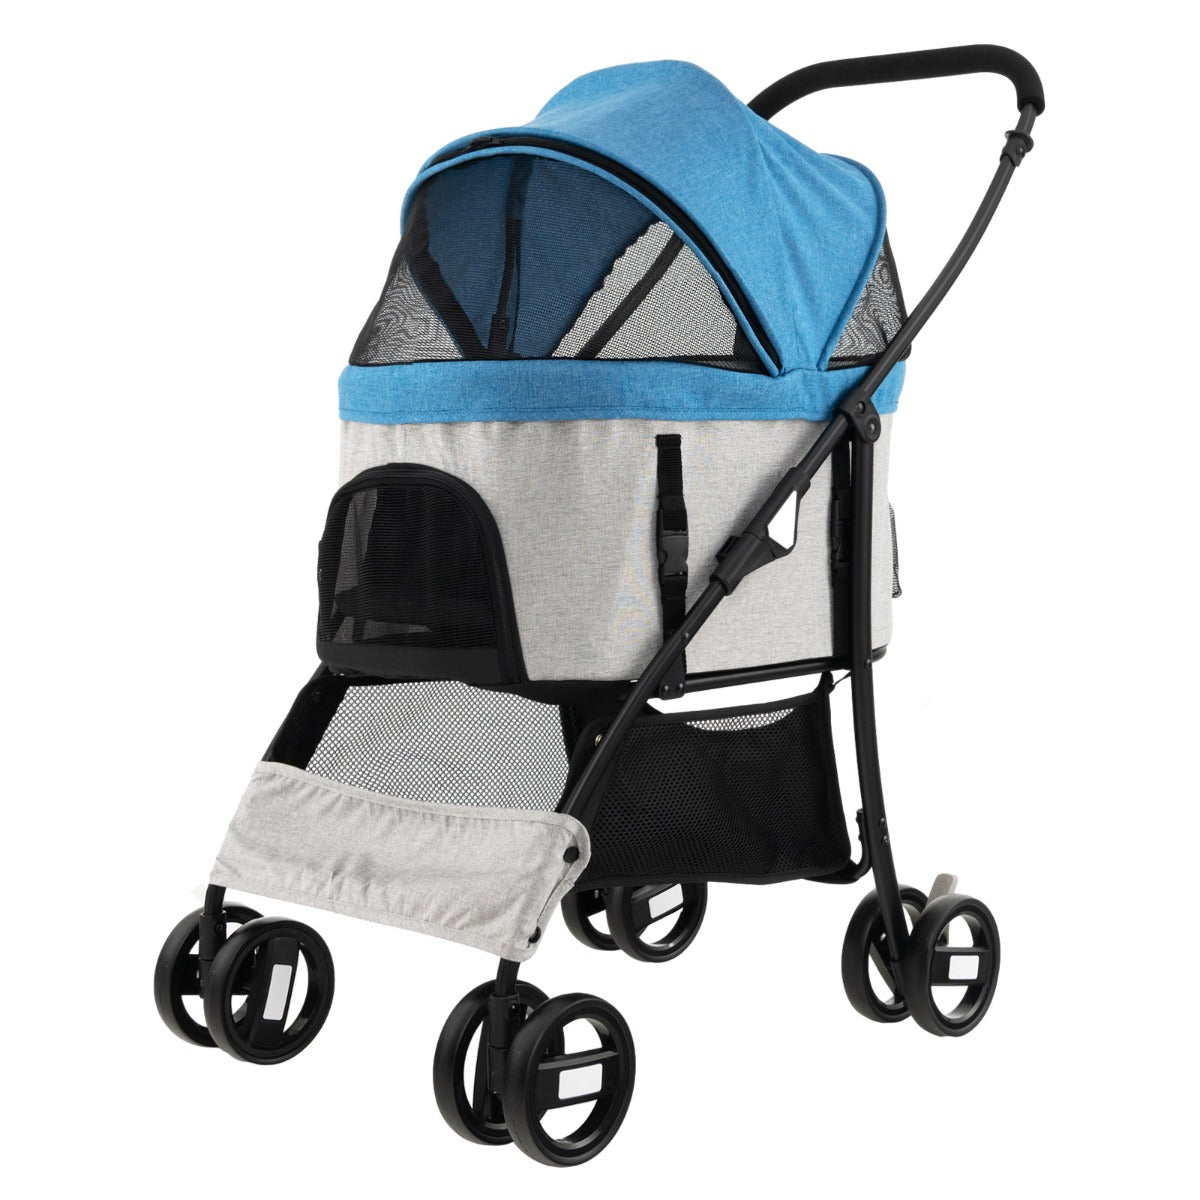 Foldable Pet Stroller with 4-Level Adjustable Canopy and Storage Basket-Blue